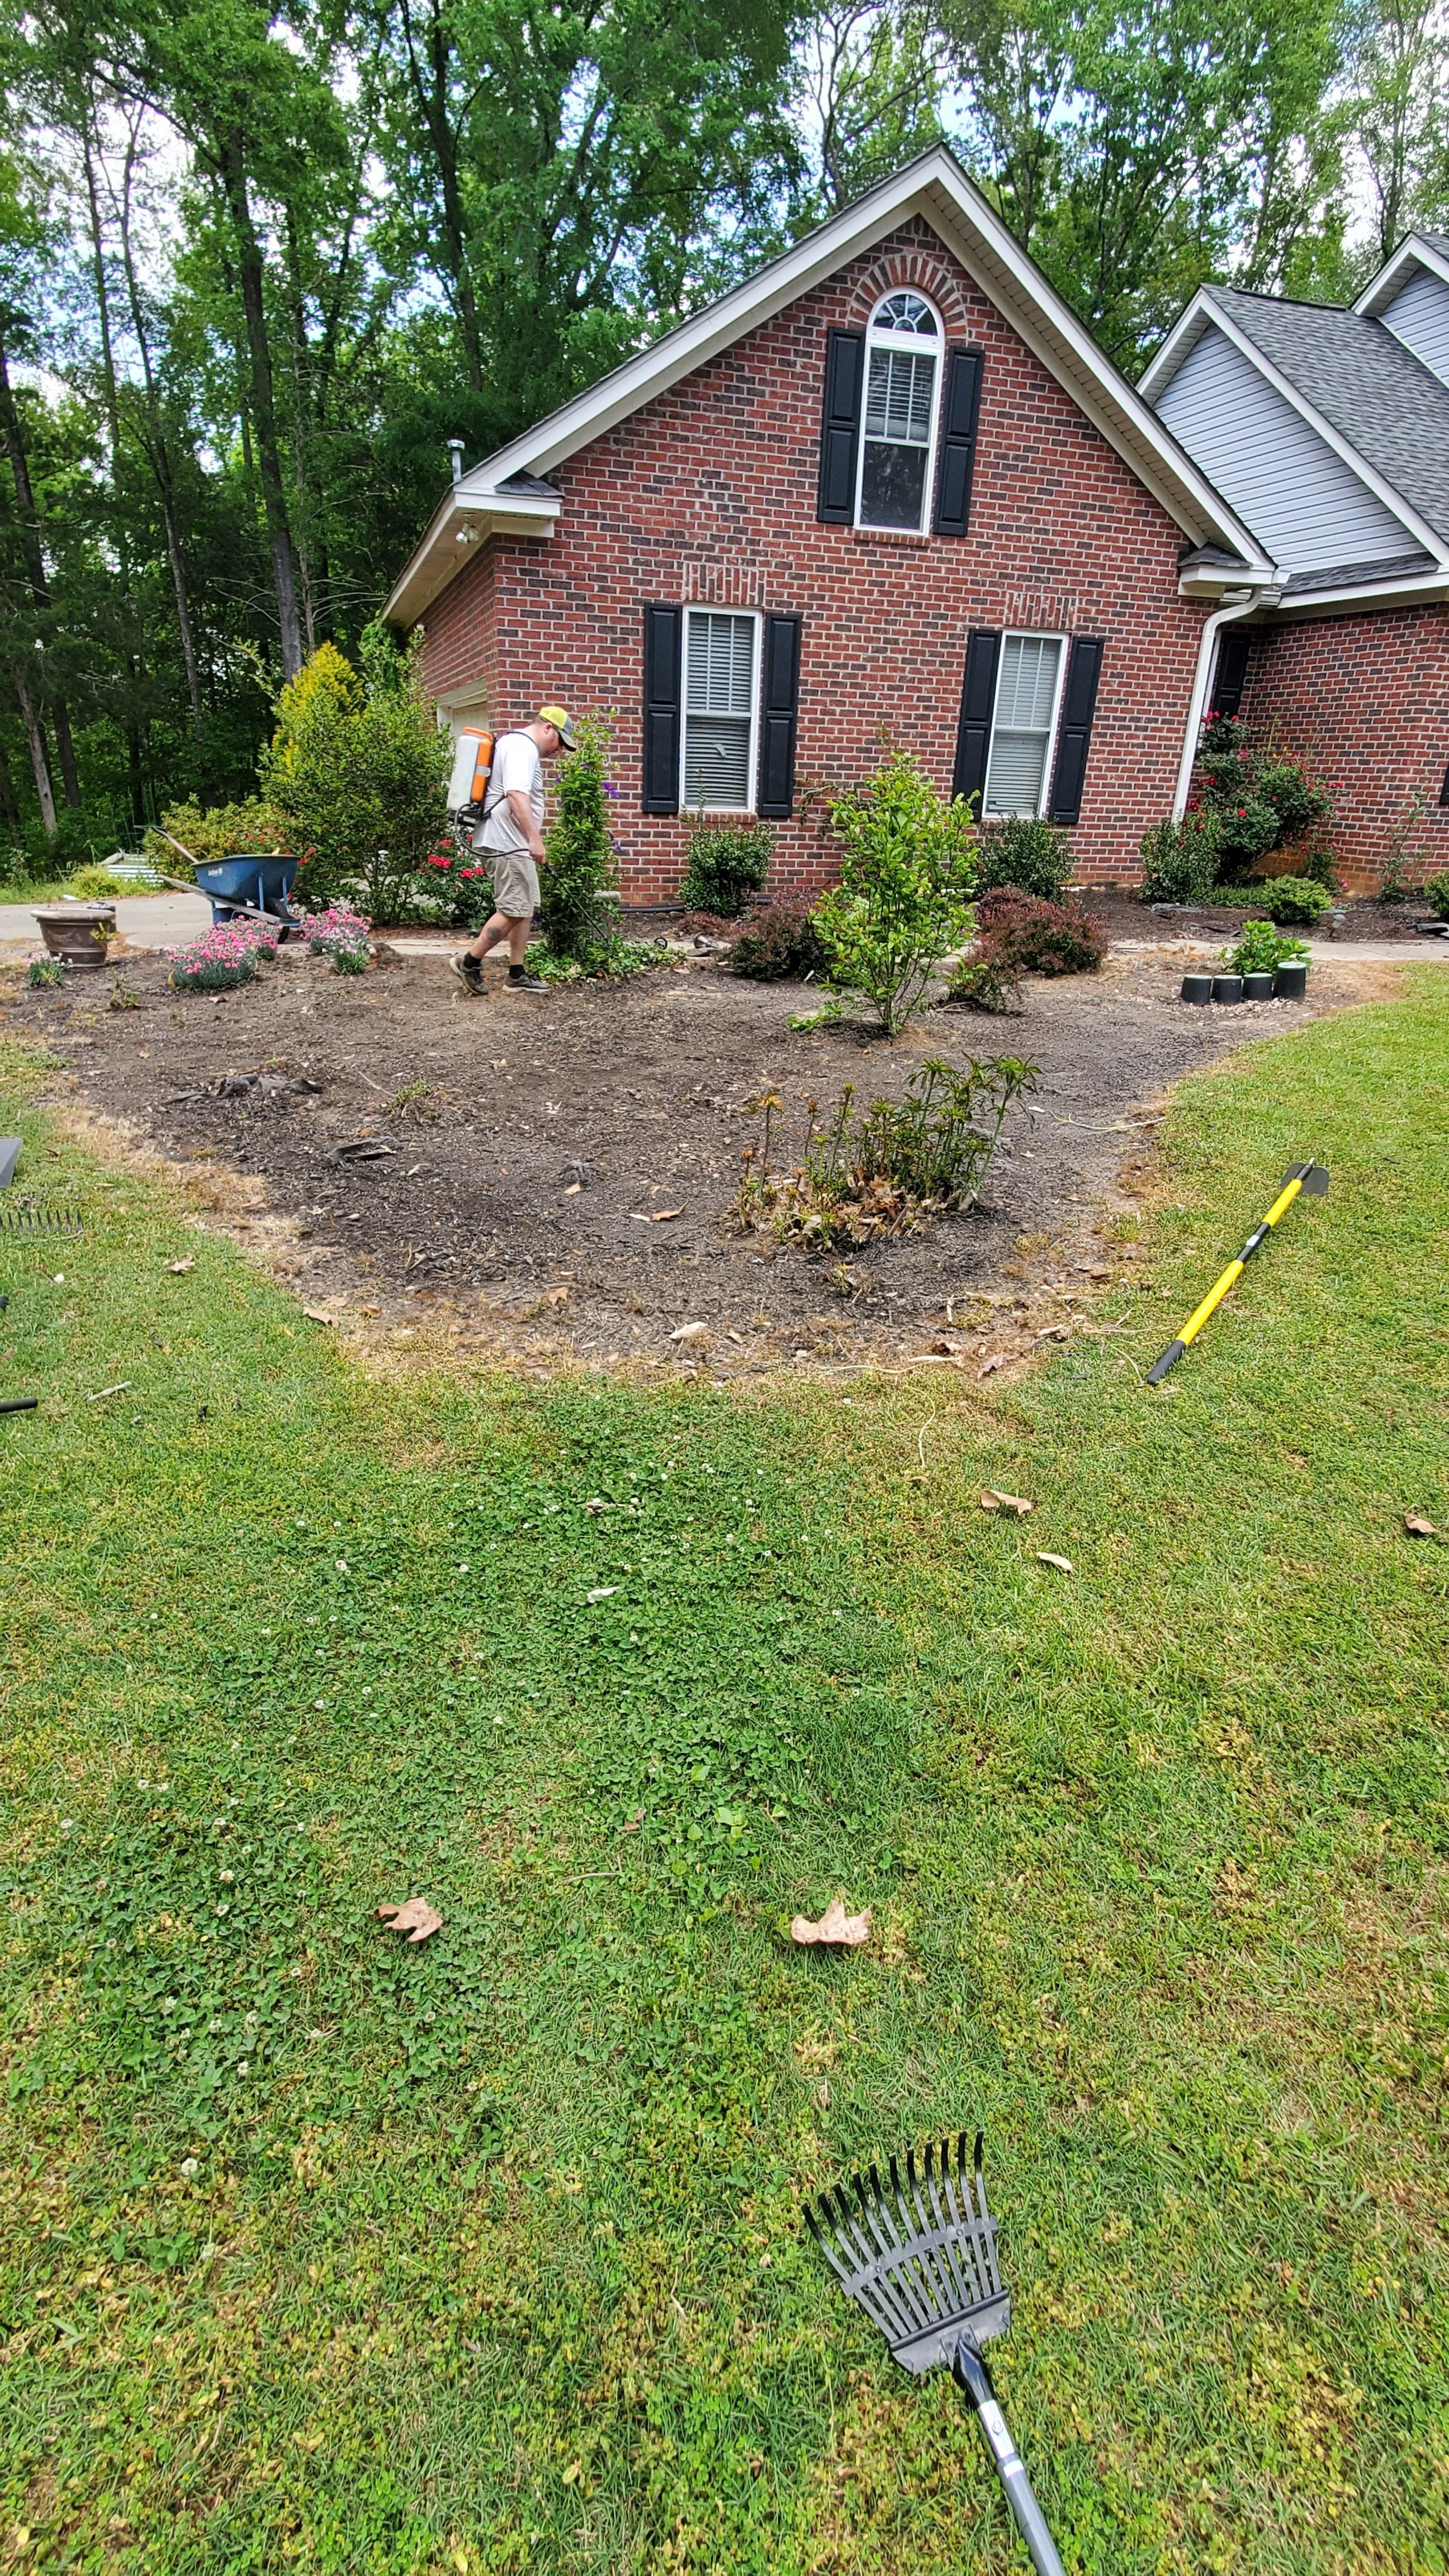 All Photos for Muddy Paws Landscaping in Lugoff, SC